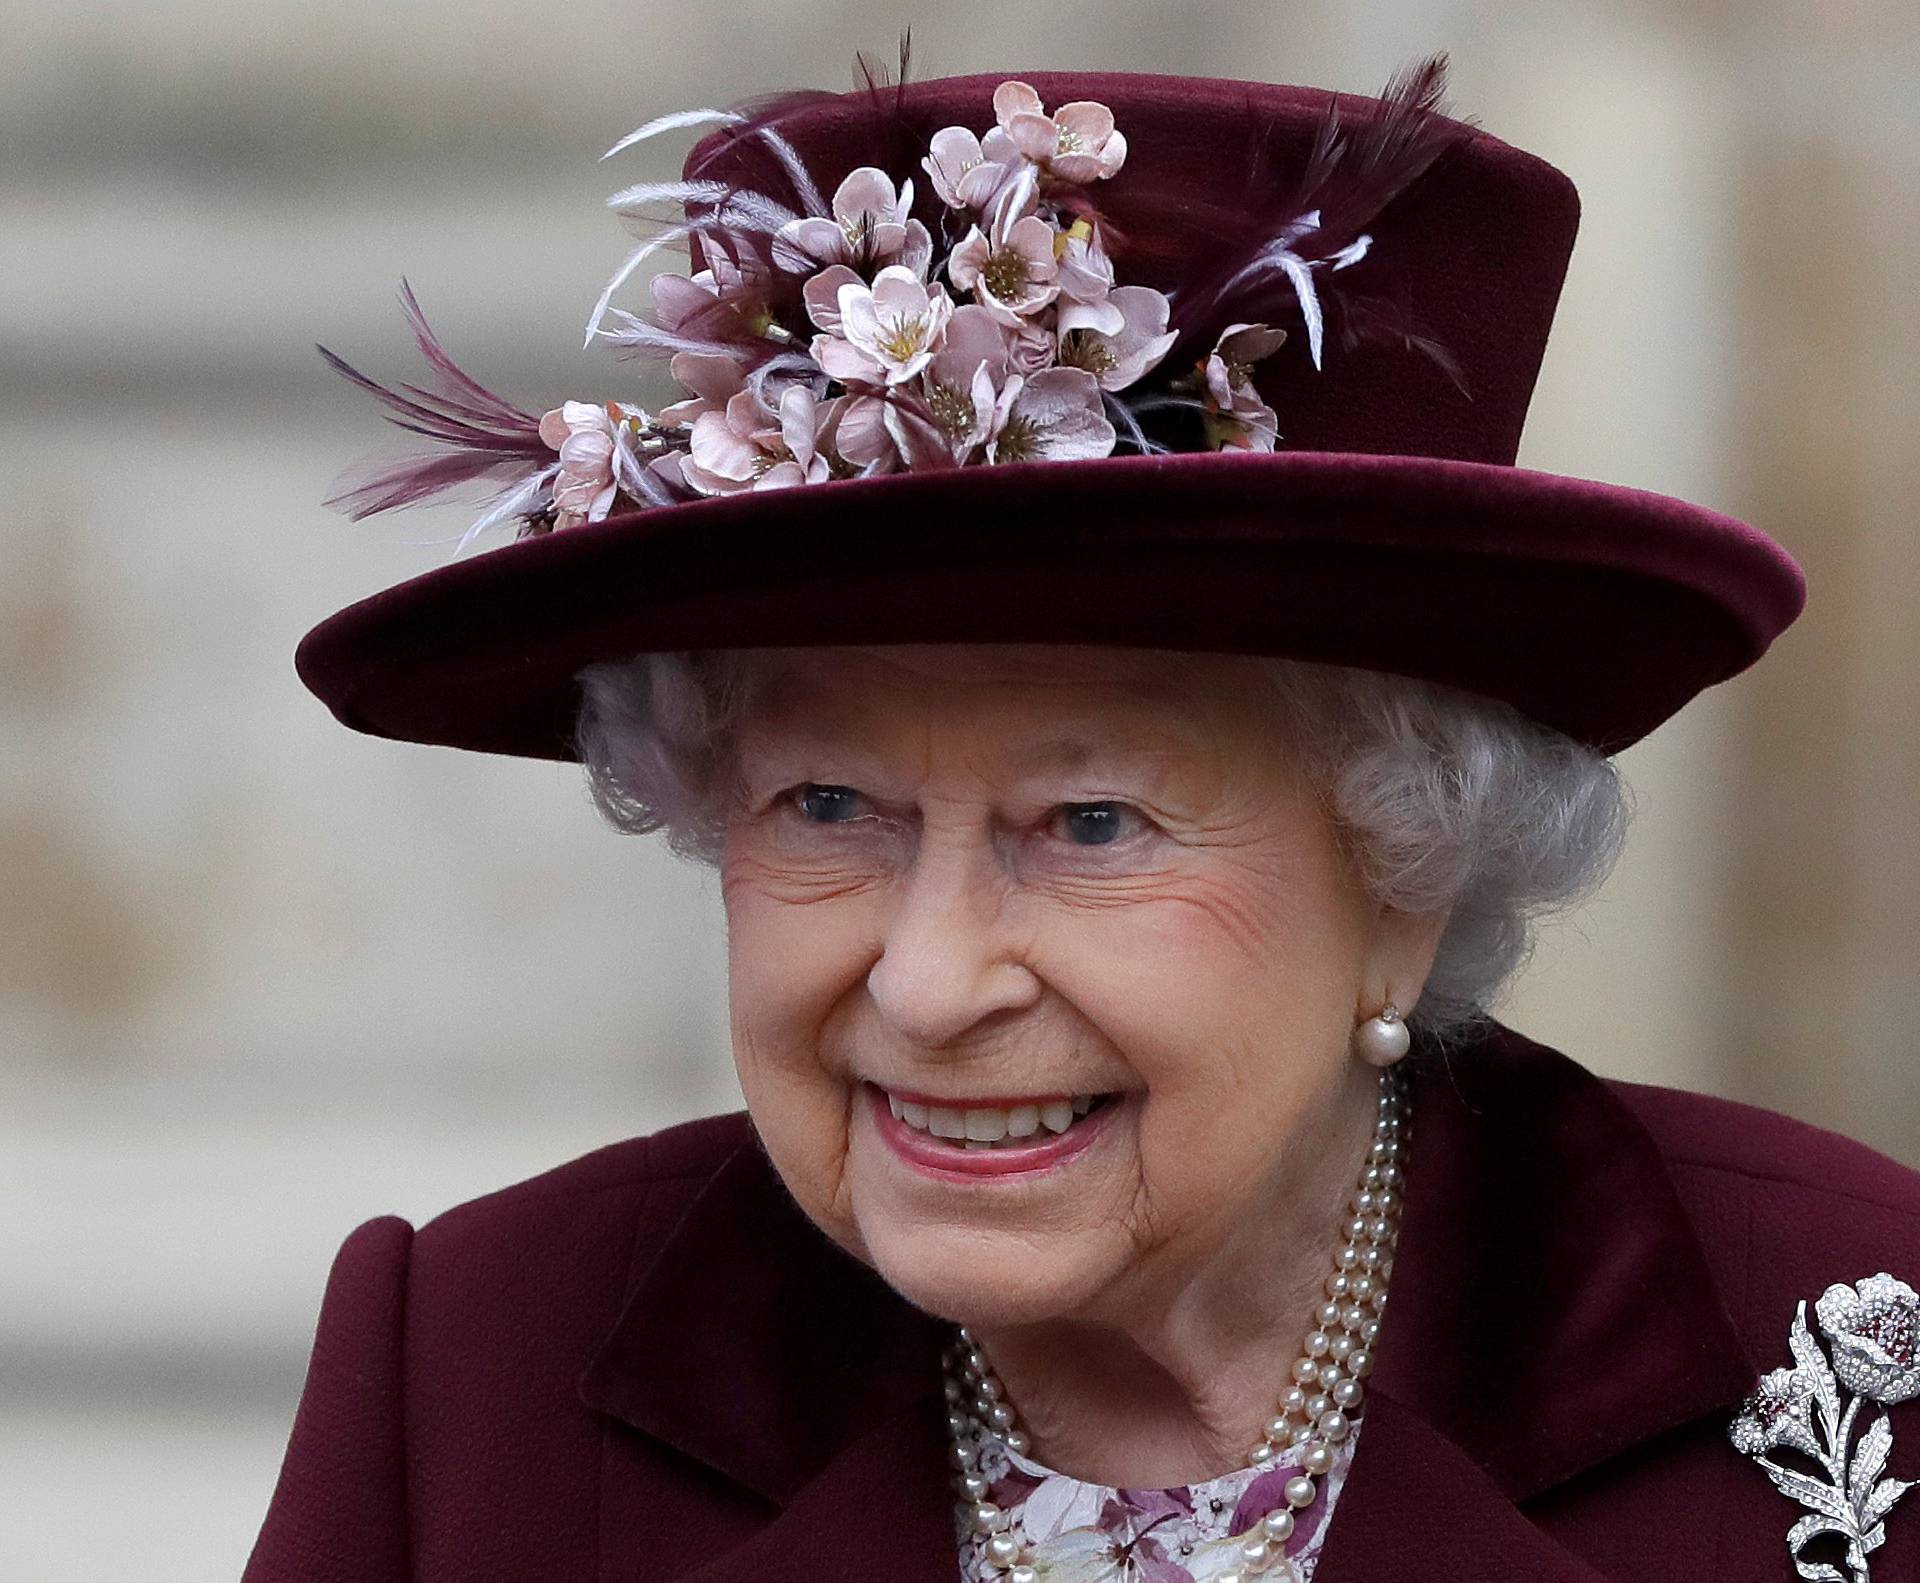 Britain's Queen Elizabeth leaves after attending the Commonwealth Service at Westminster Abbey in London